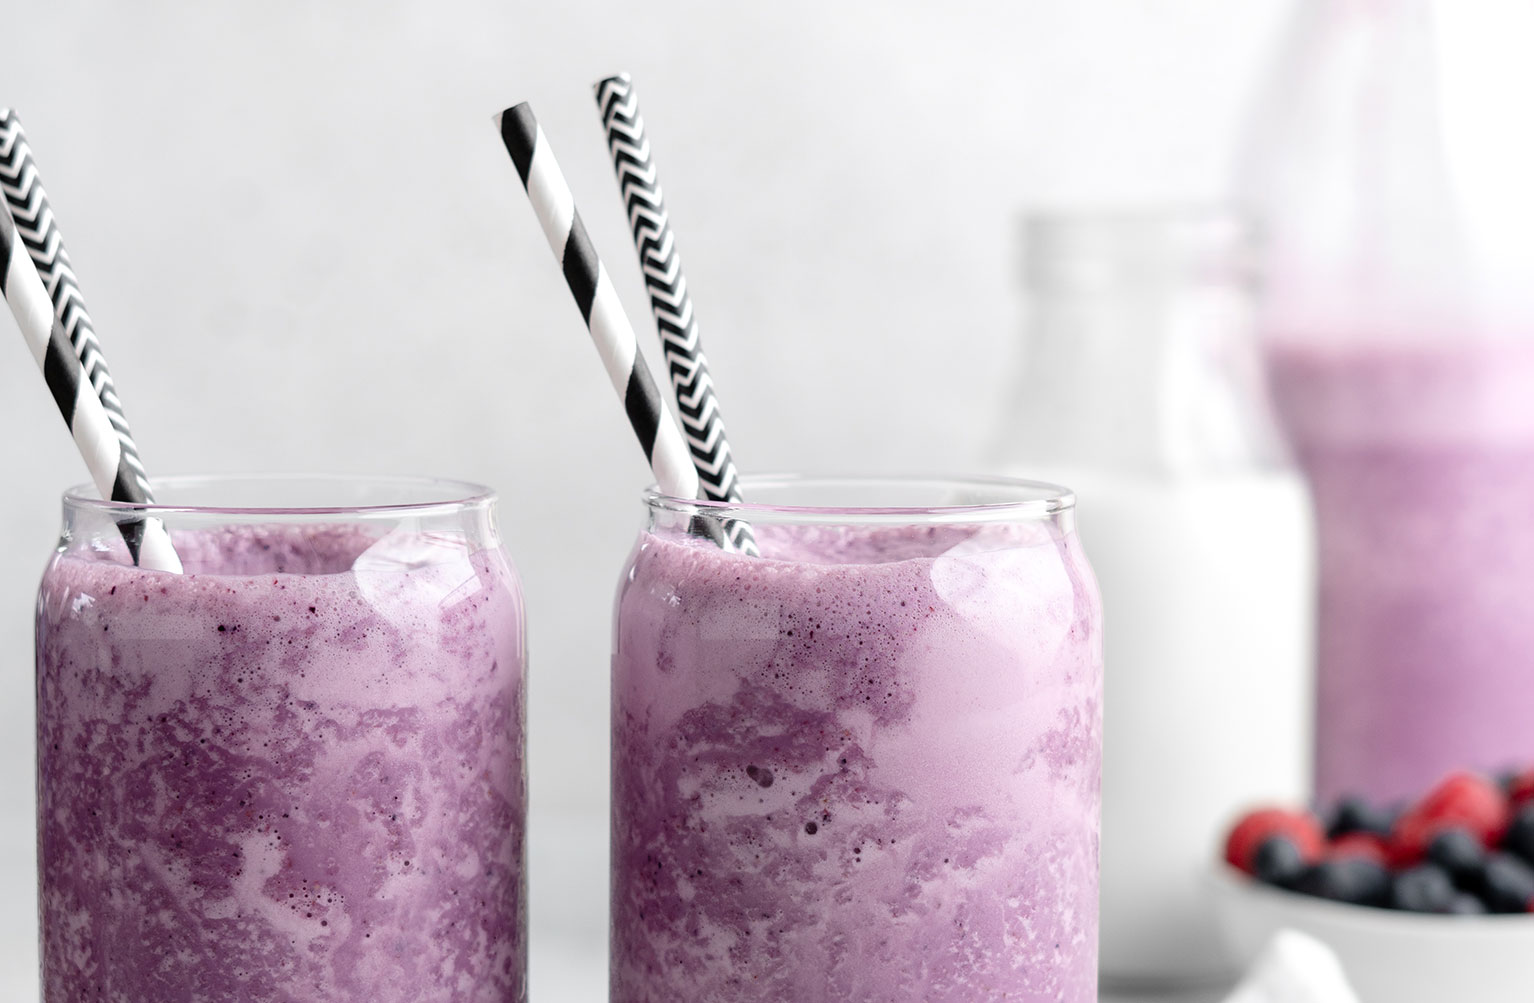 Two roasted berry milkshakes in glasses with straws